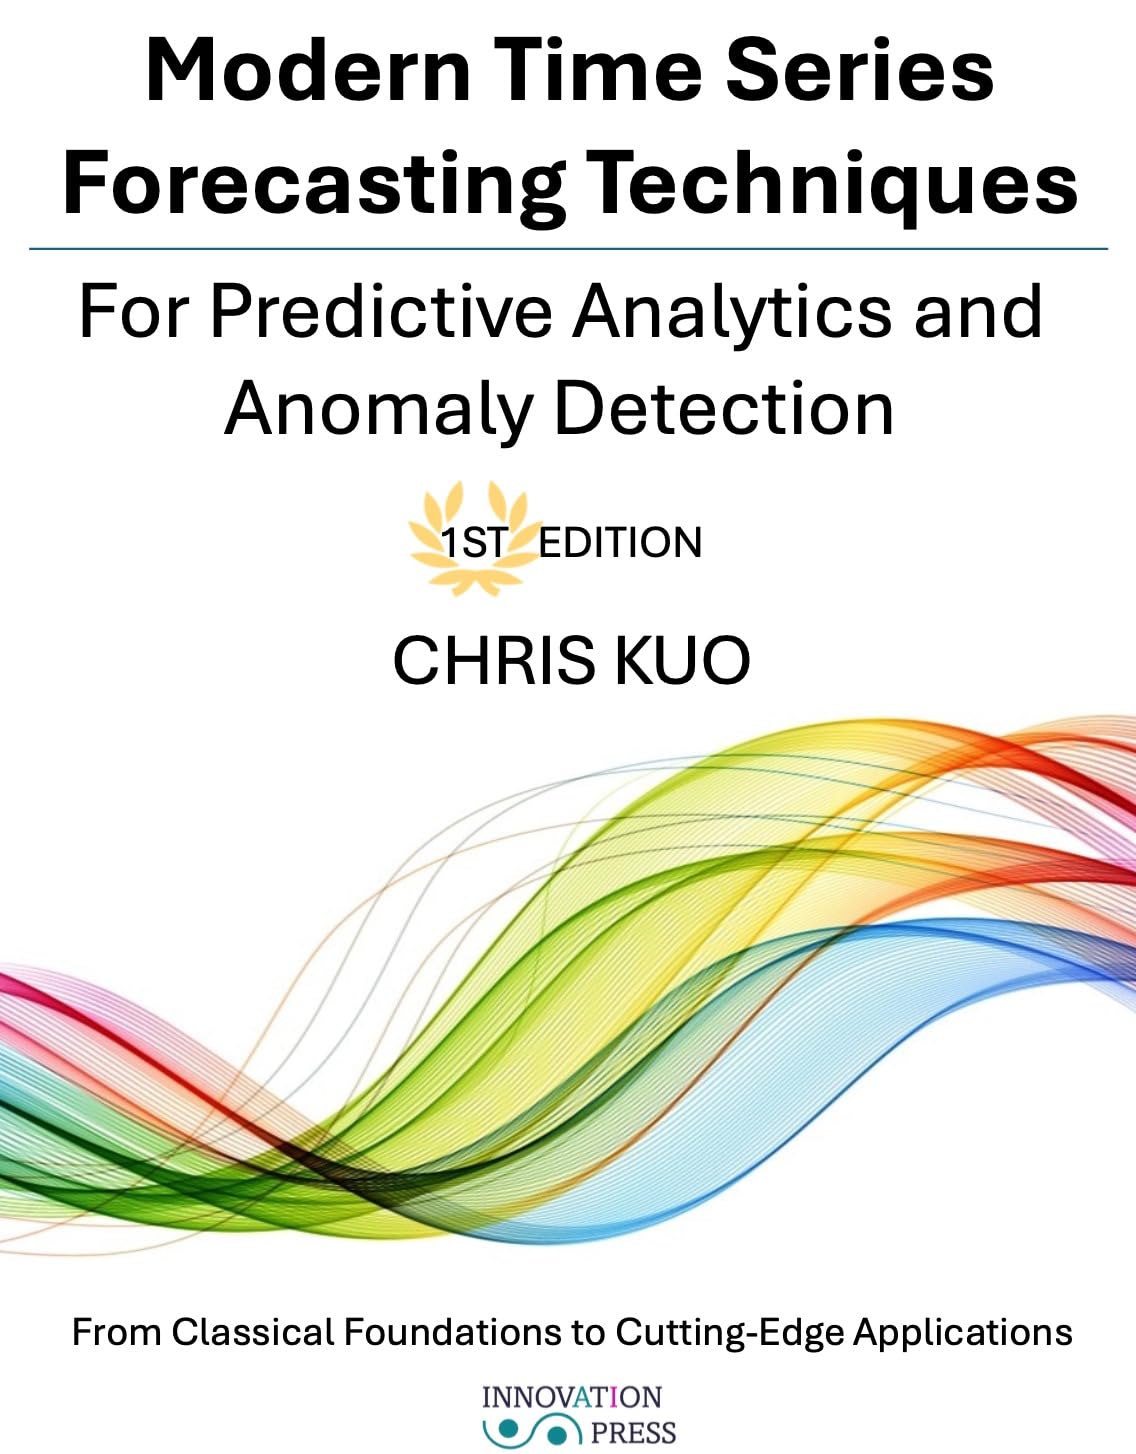 Great Book for Mastering Time Series Analysis and Forecasting